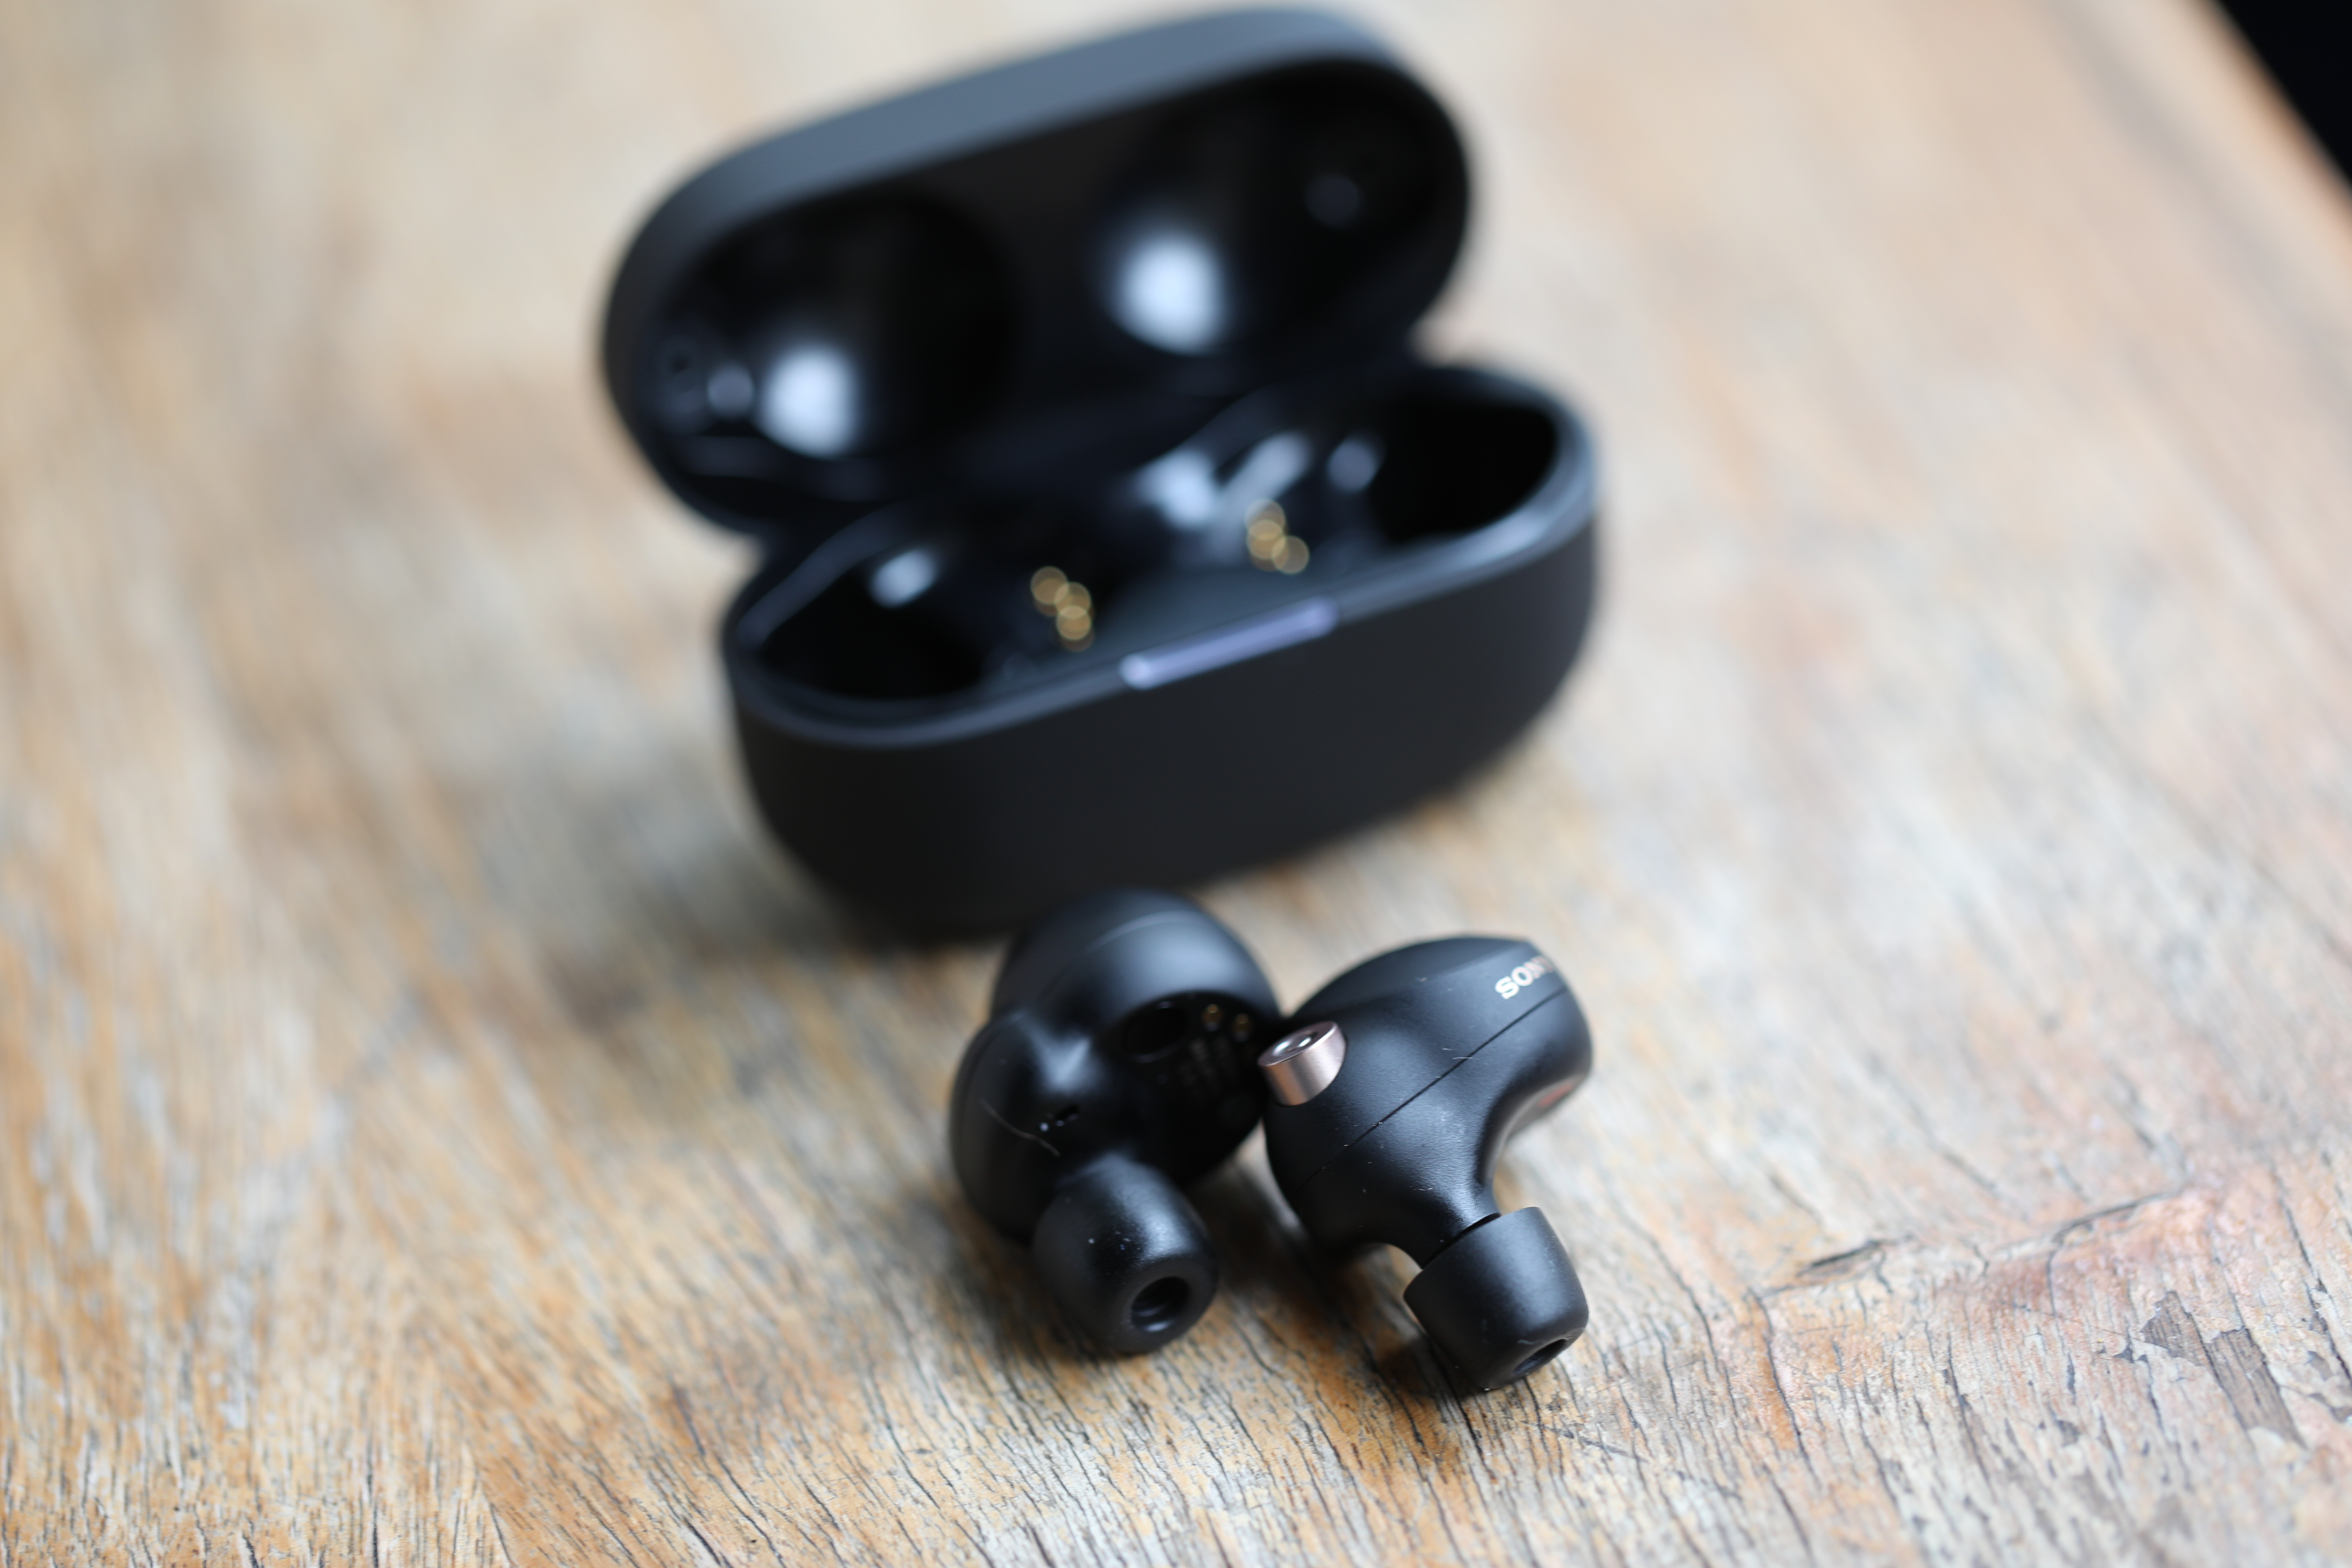 Sony sets a new standard with the WF-1000XM4 earbuds | TechCrunch